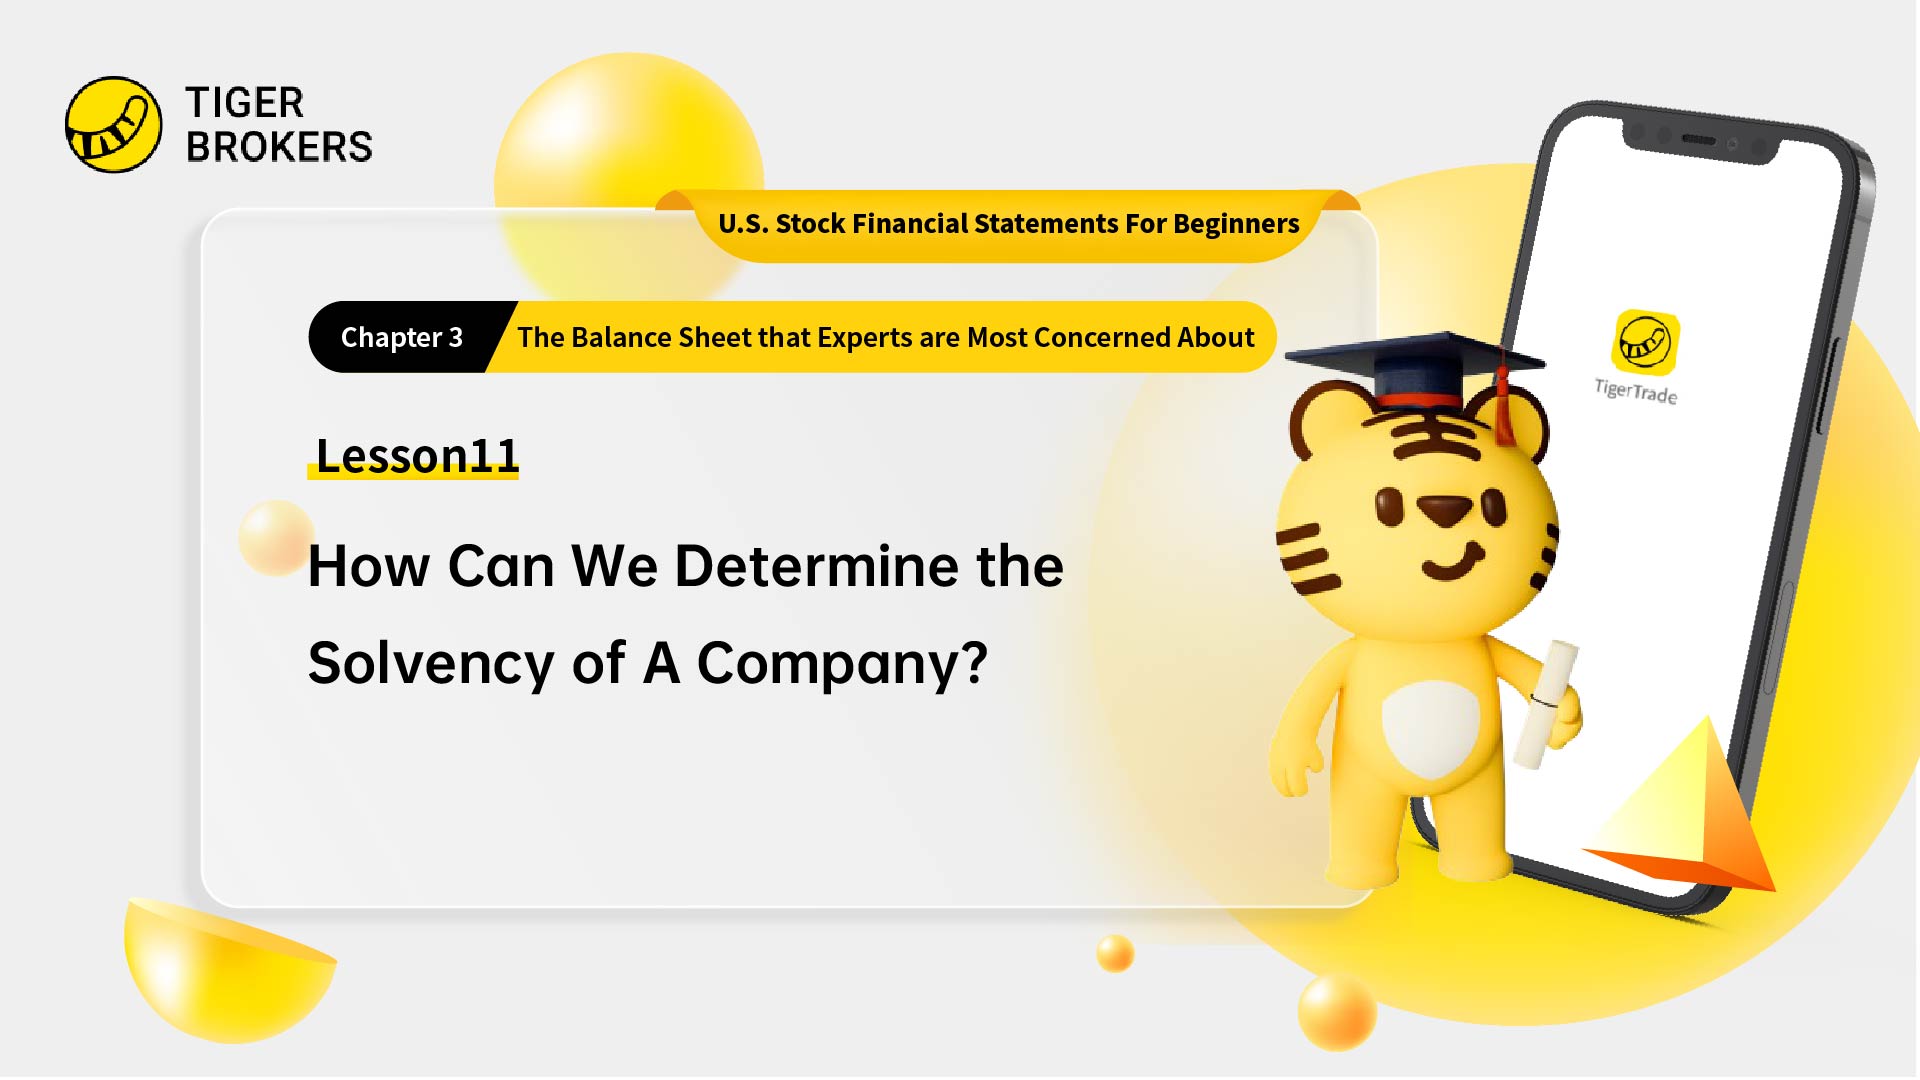 Lesson 11:  How can we determine the solvency of a company?